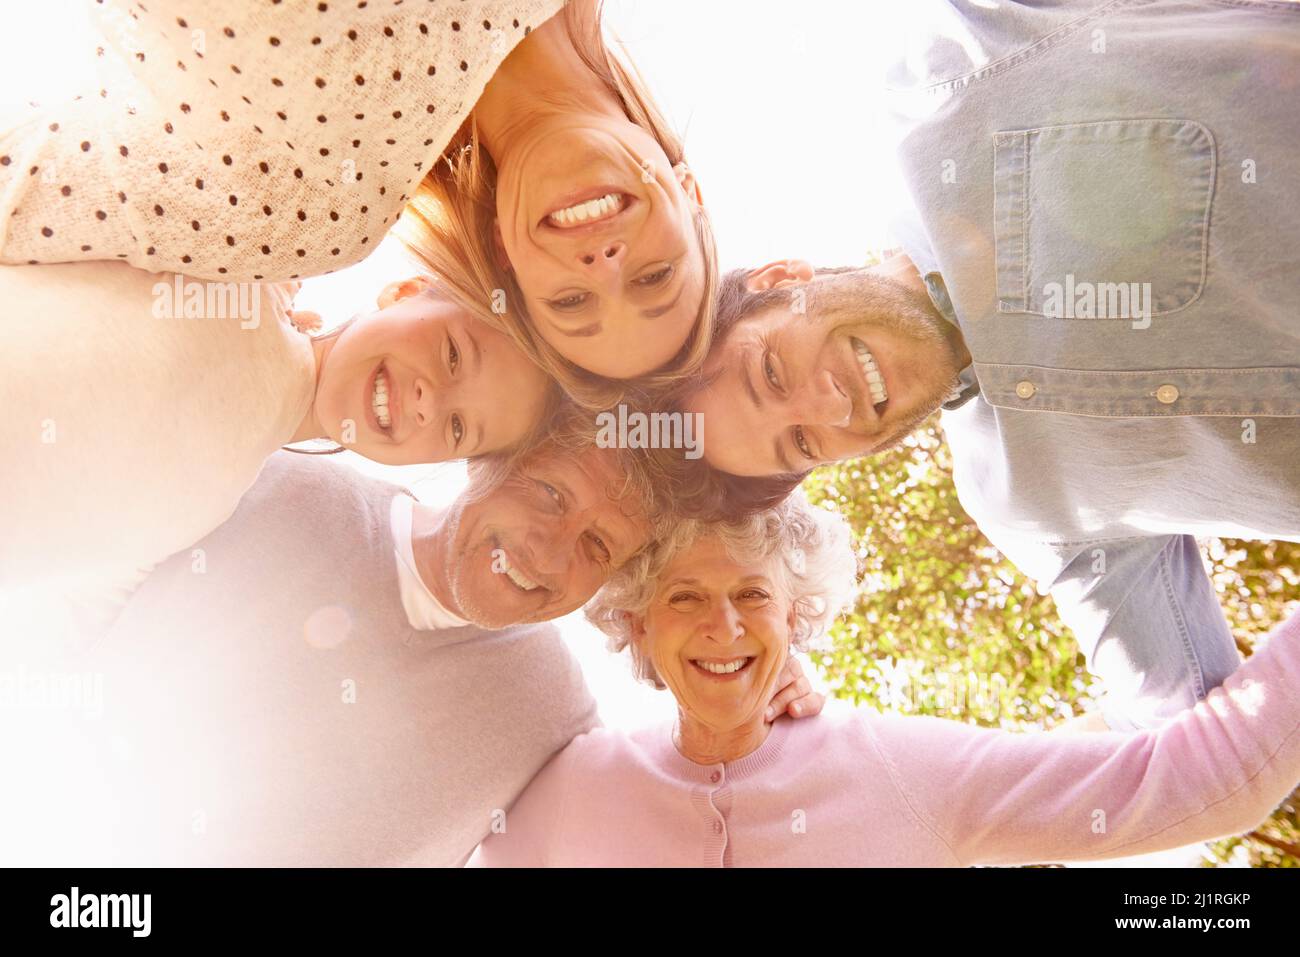 Our family sticks together. A low angle portrait of a happy family standing in a huddle. Stock Photo